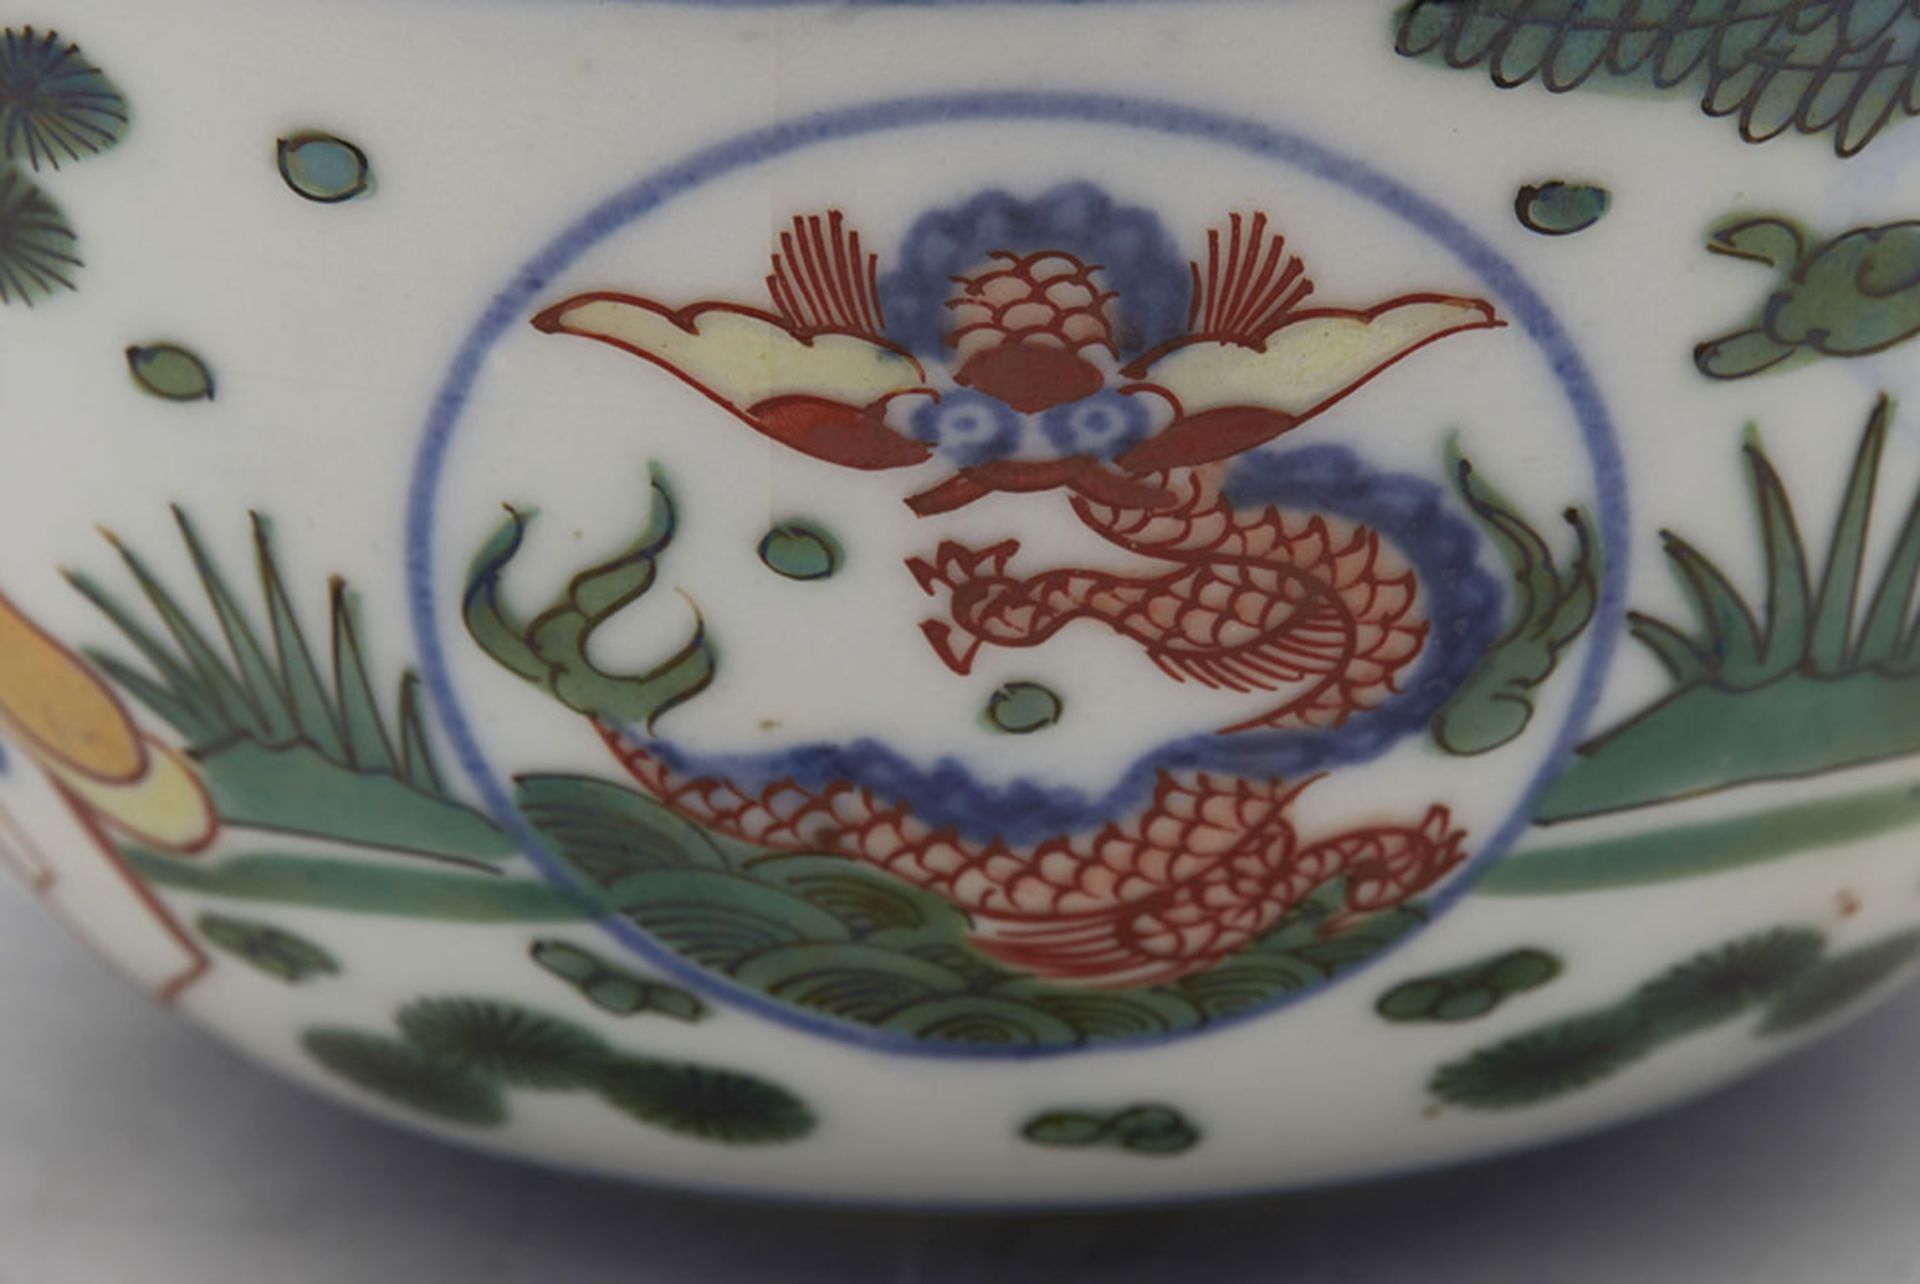 Superb Vintage Chinese Wucai Figural Lidded Rice Bowl With Dragons 20Th C. - Image 8 of 11